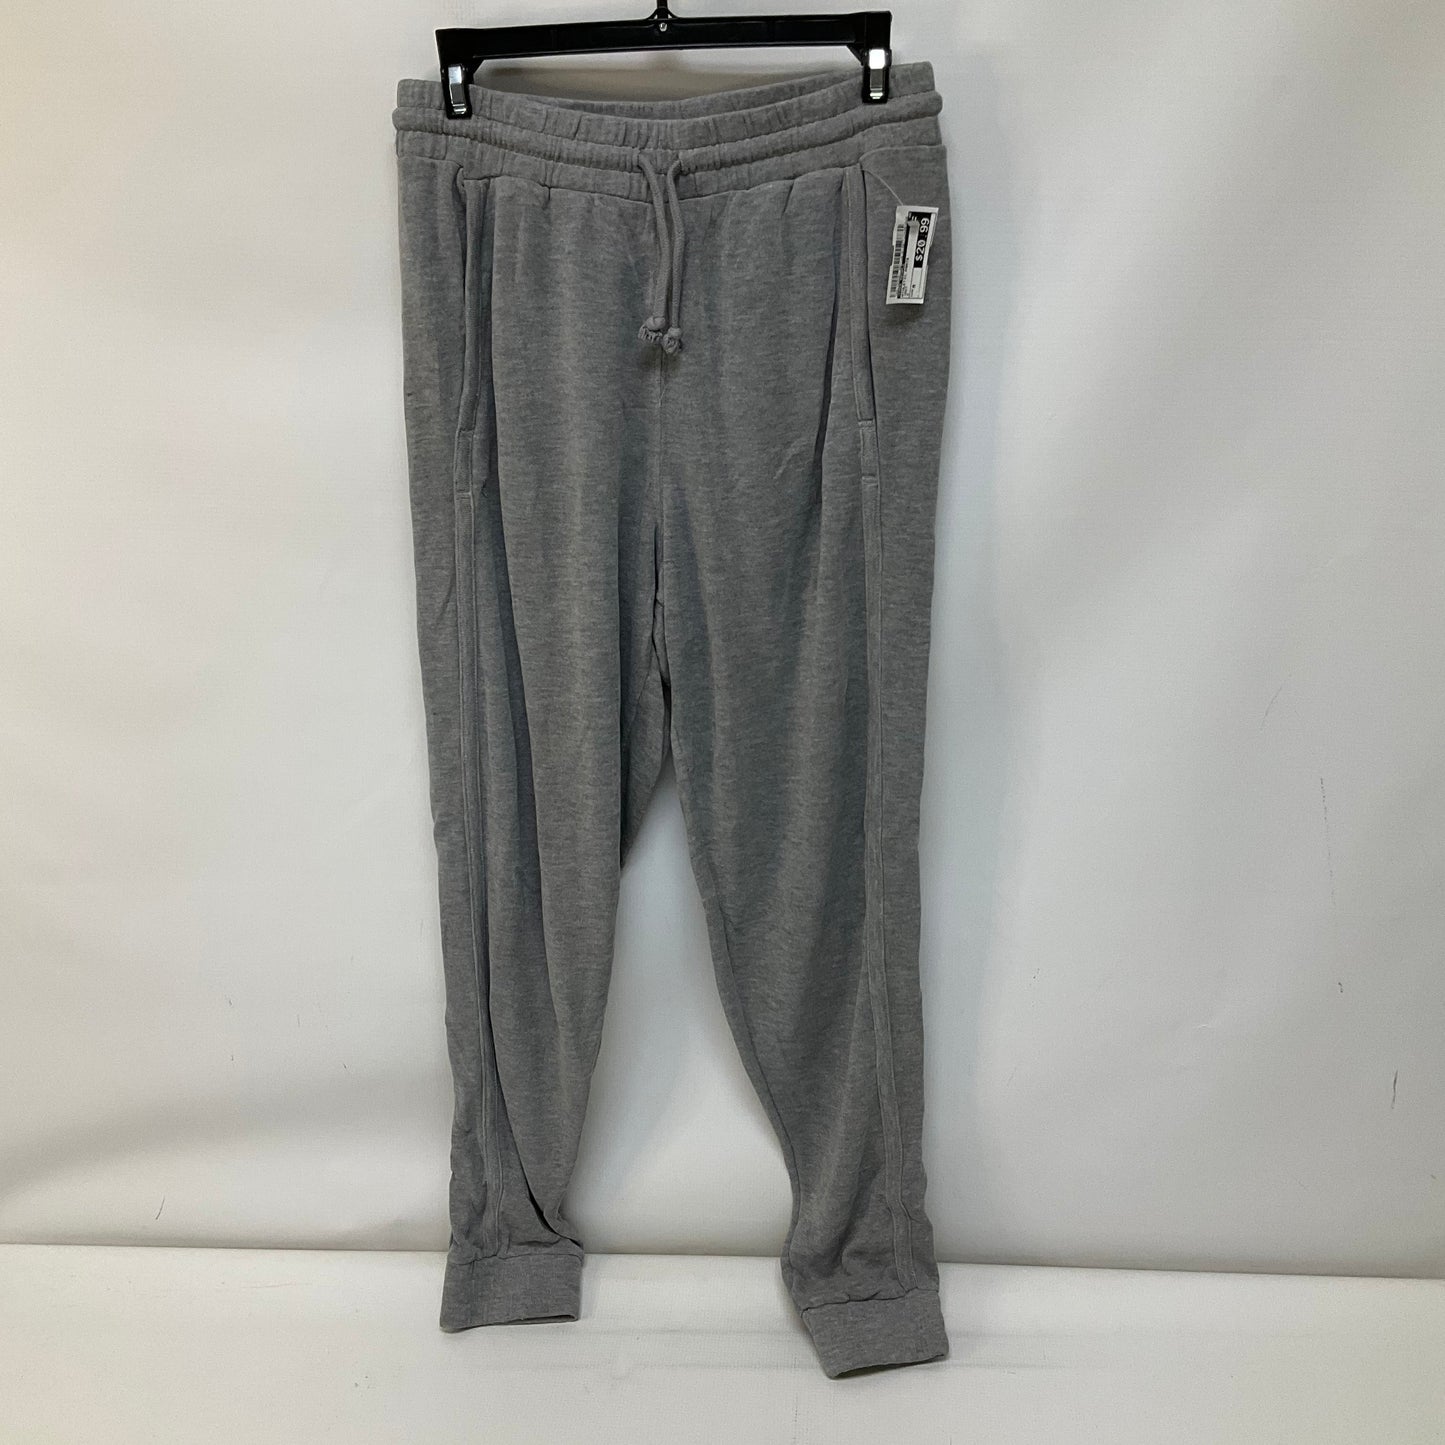 Grey Athletic Pants Free People, Size M